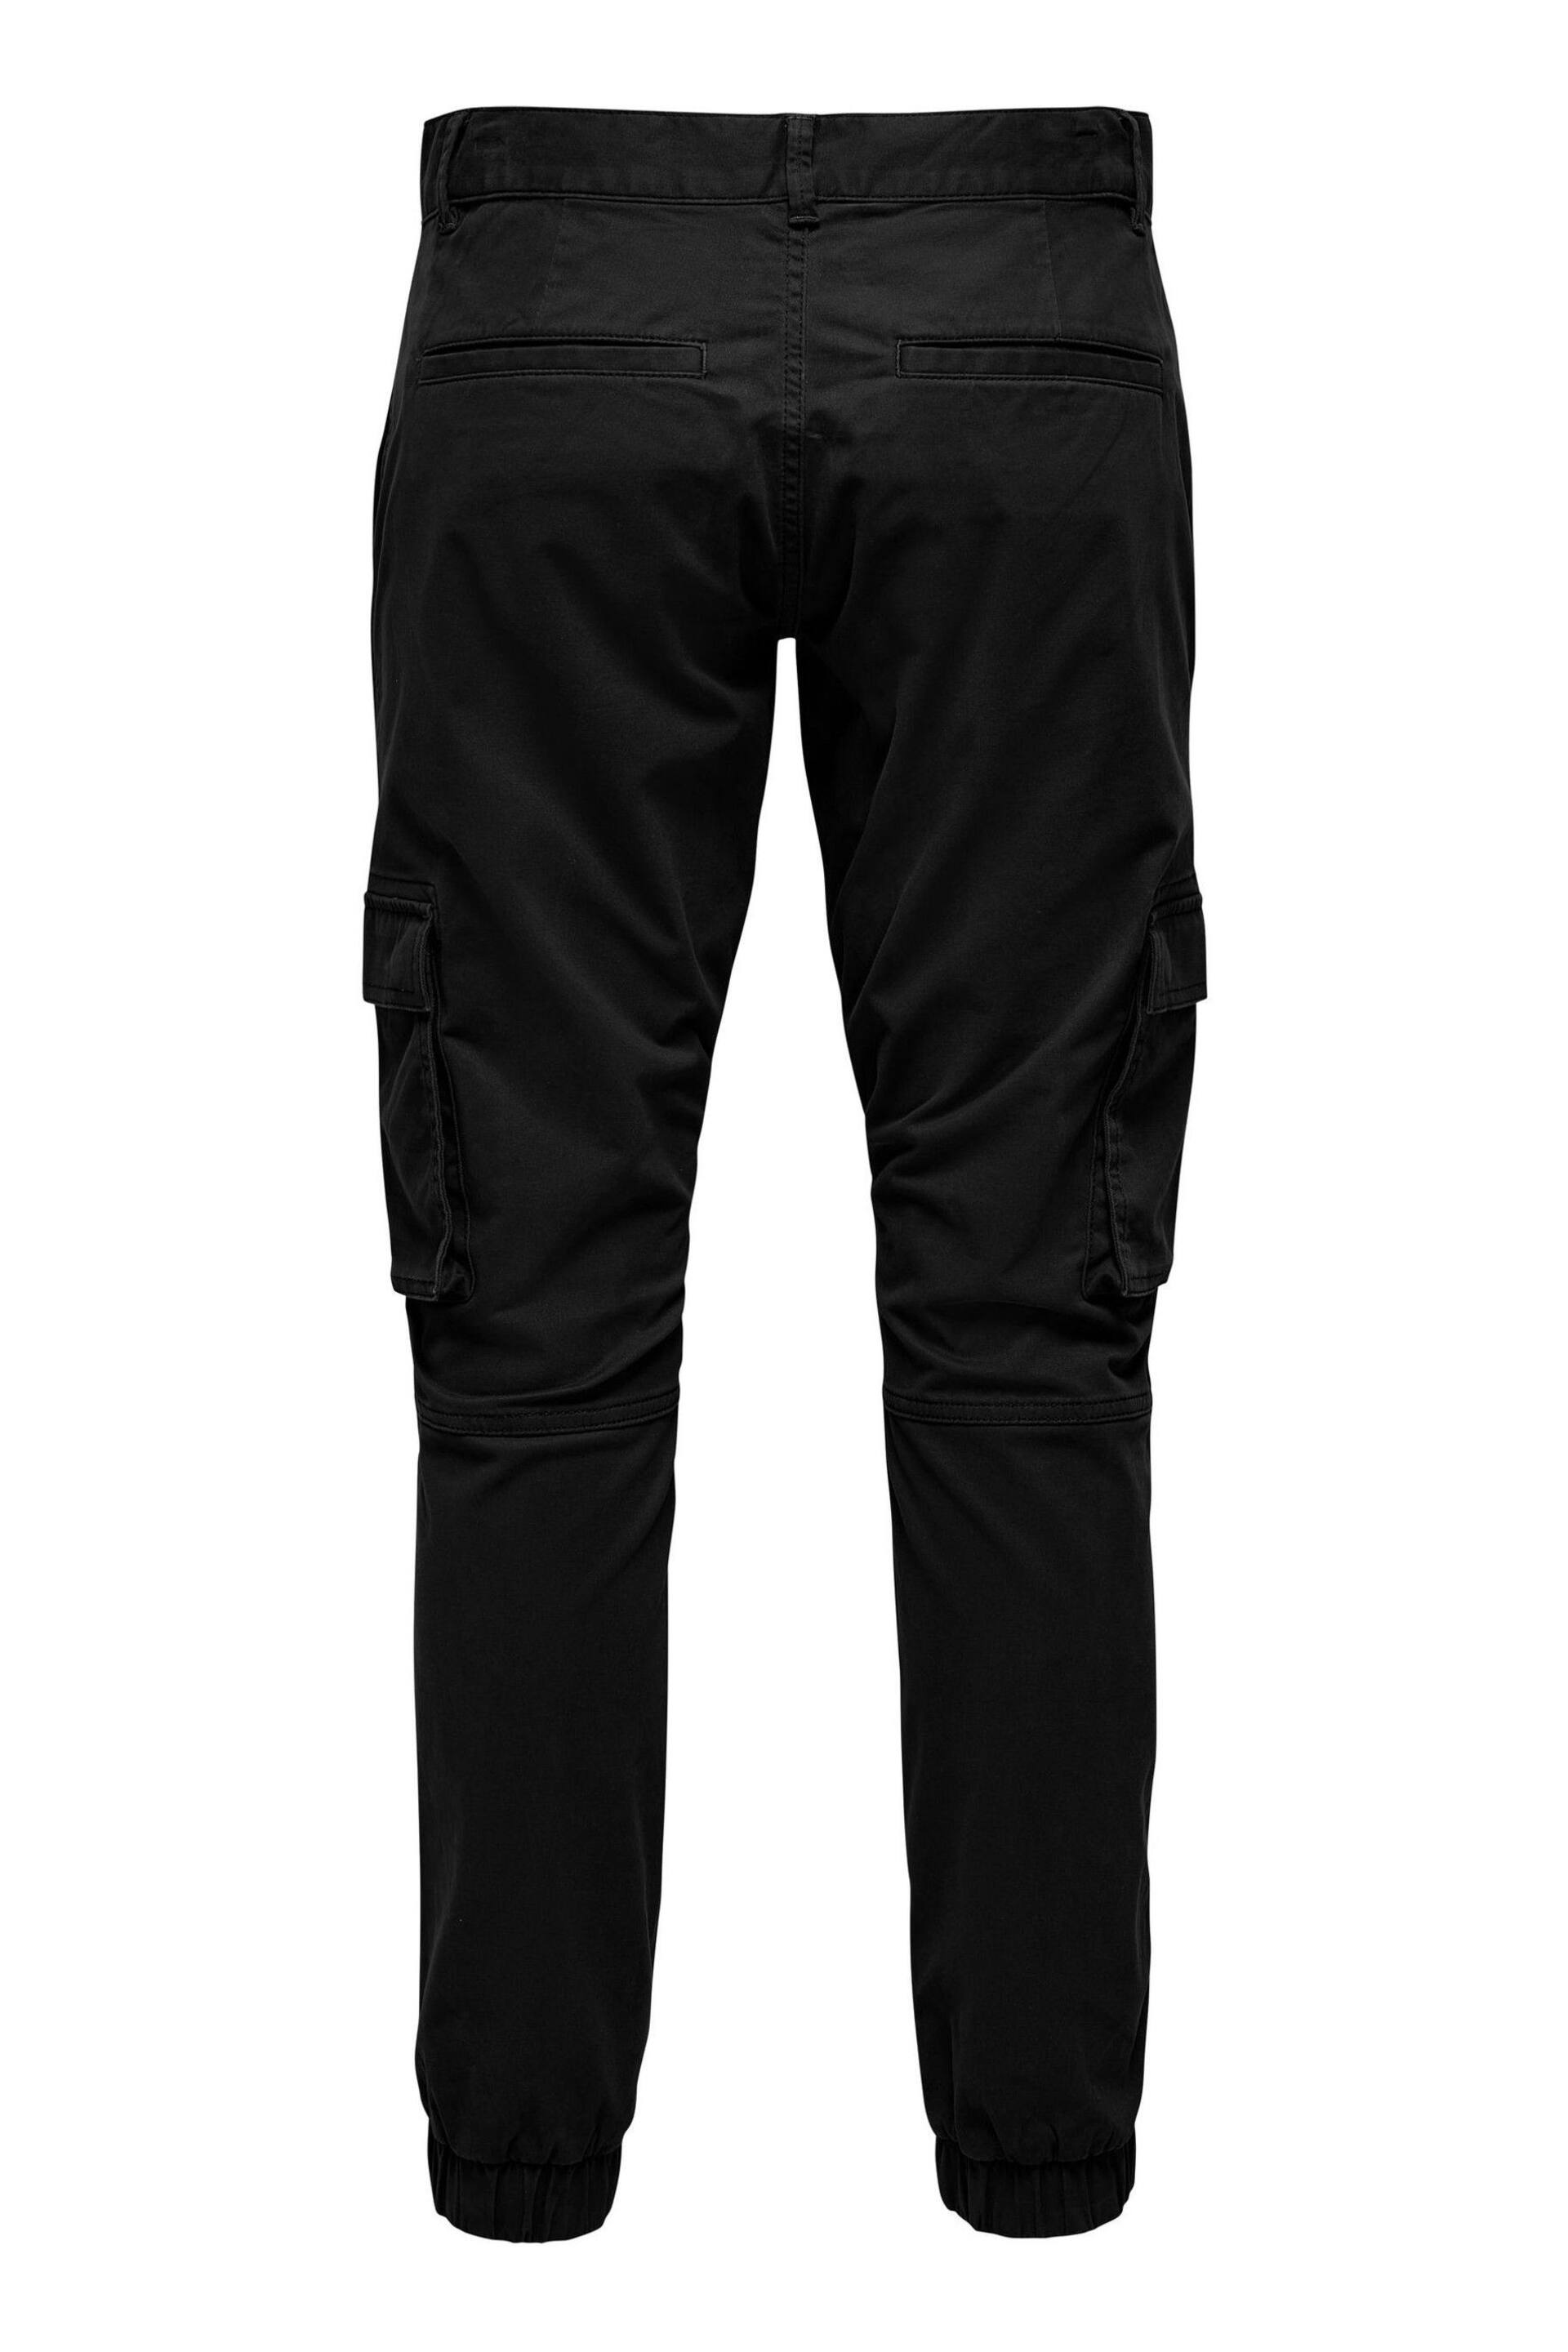 Only & Sons Black Cargo Detail Trousers with Cuffed Ankle - Image 4 of 4